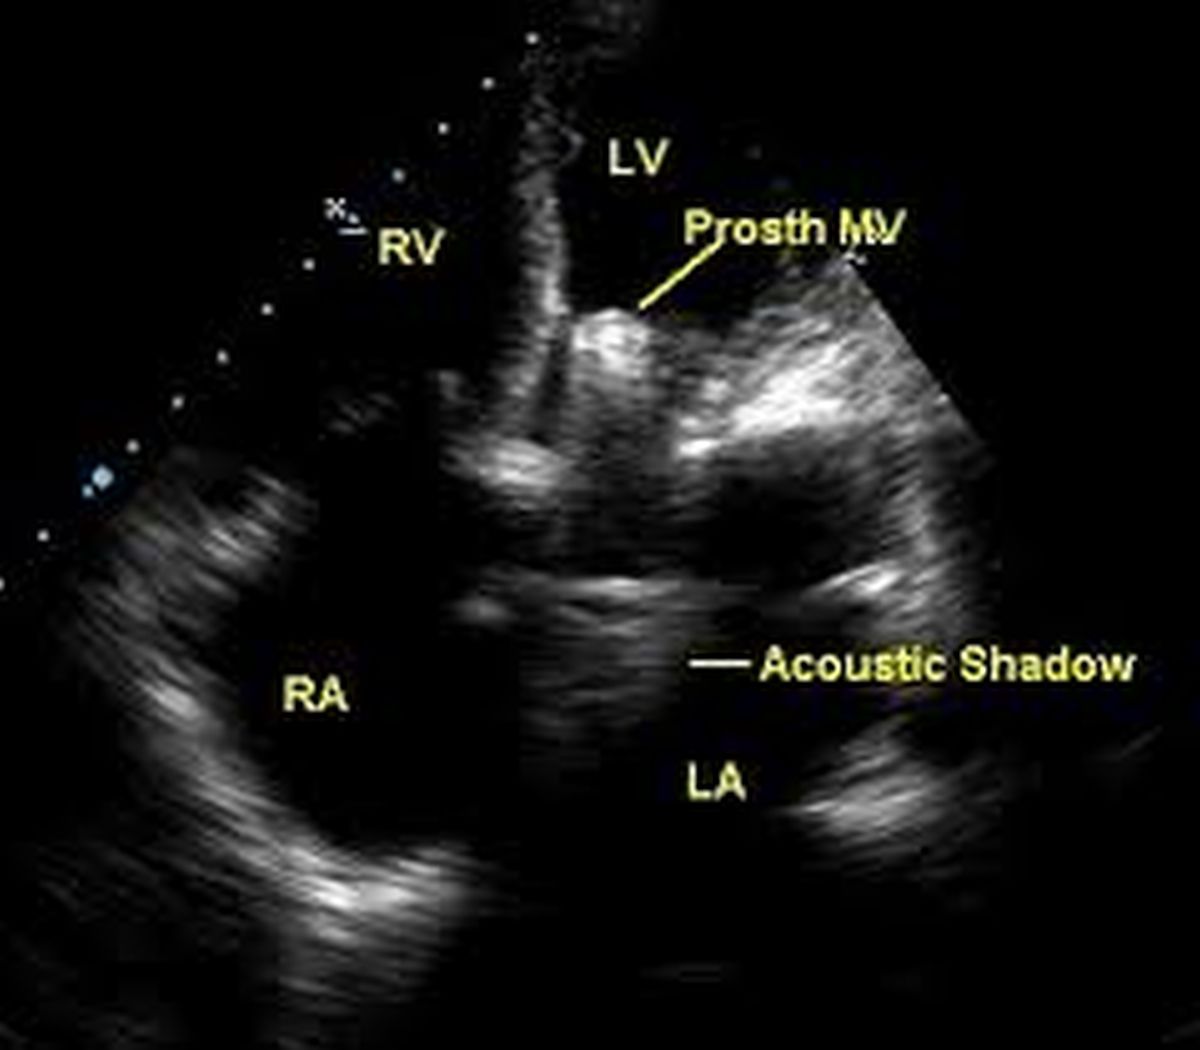 Prosthetic mitral valve in apical four chamber view